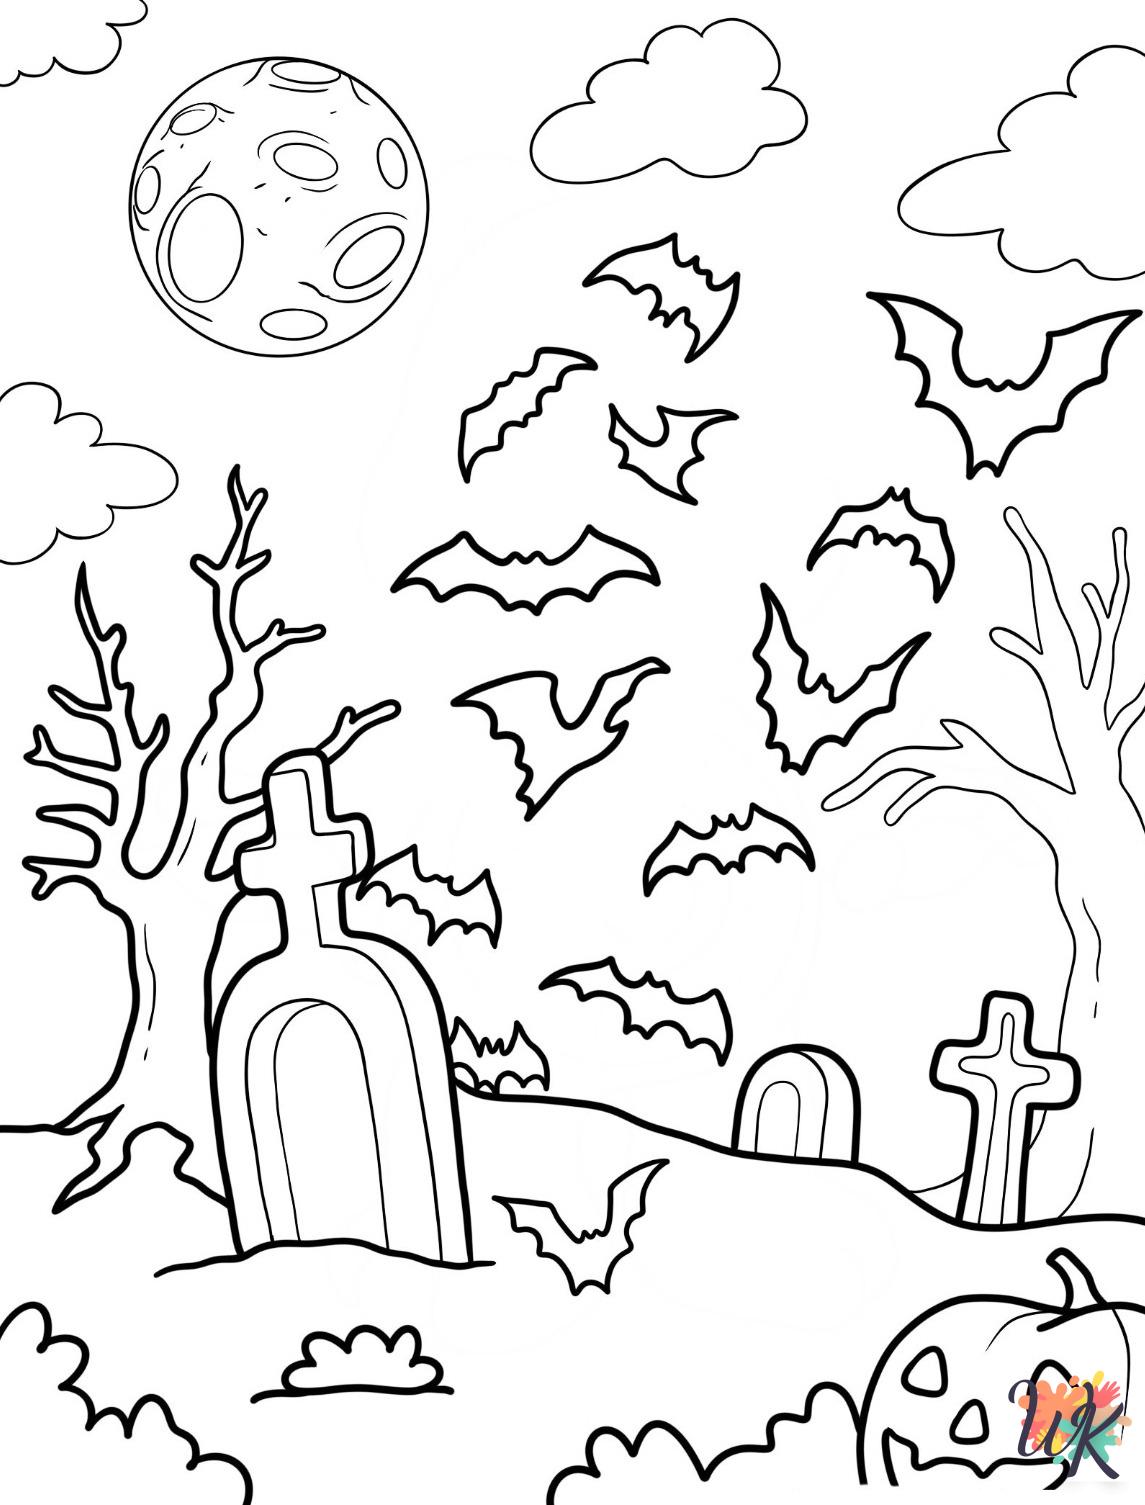 Bat themed coloring pages